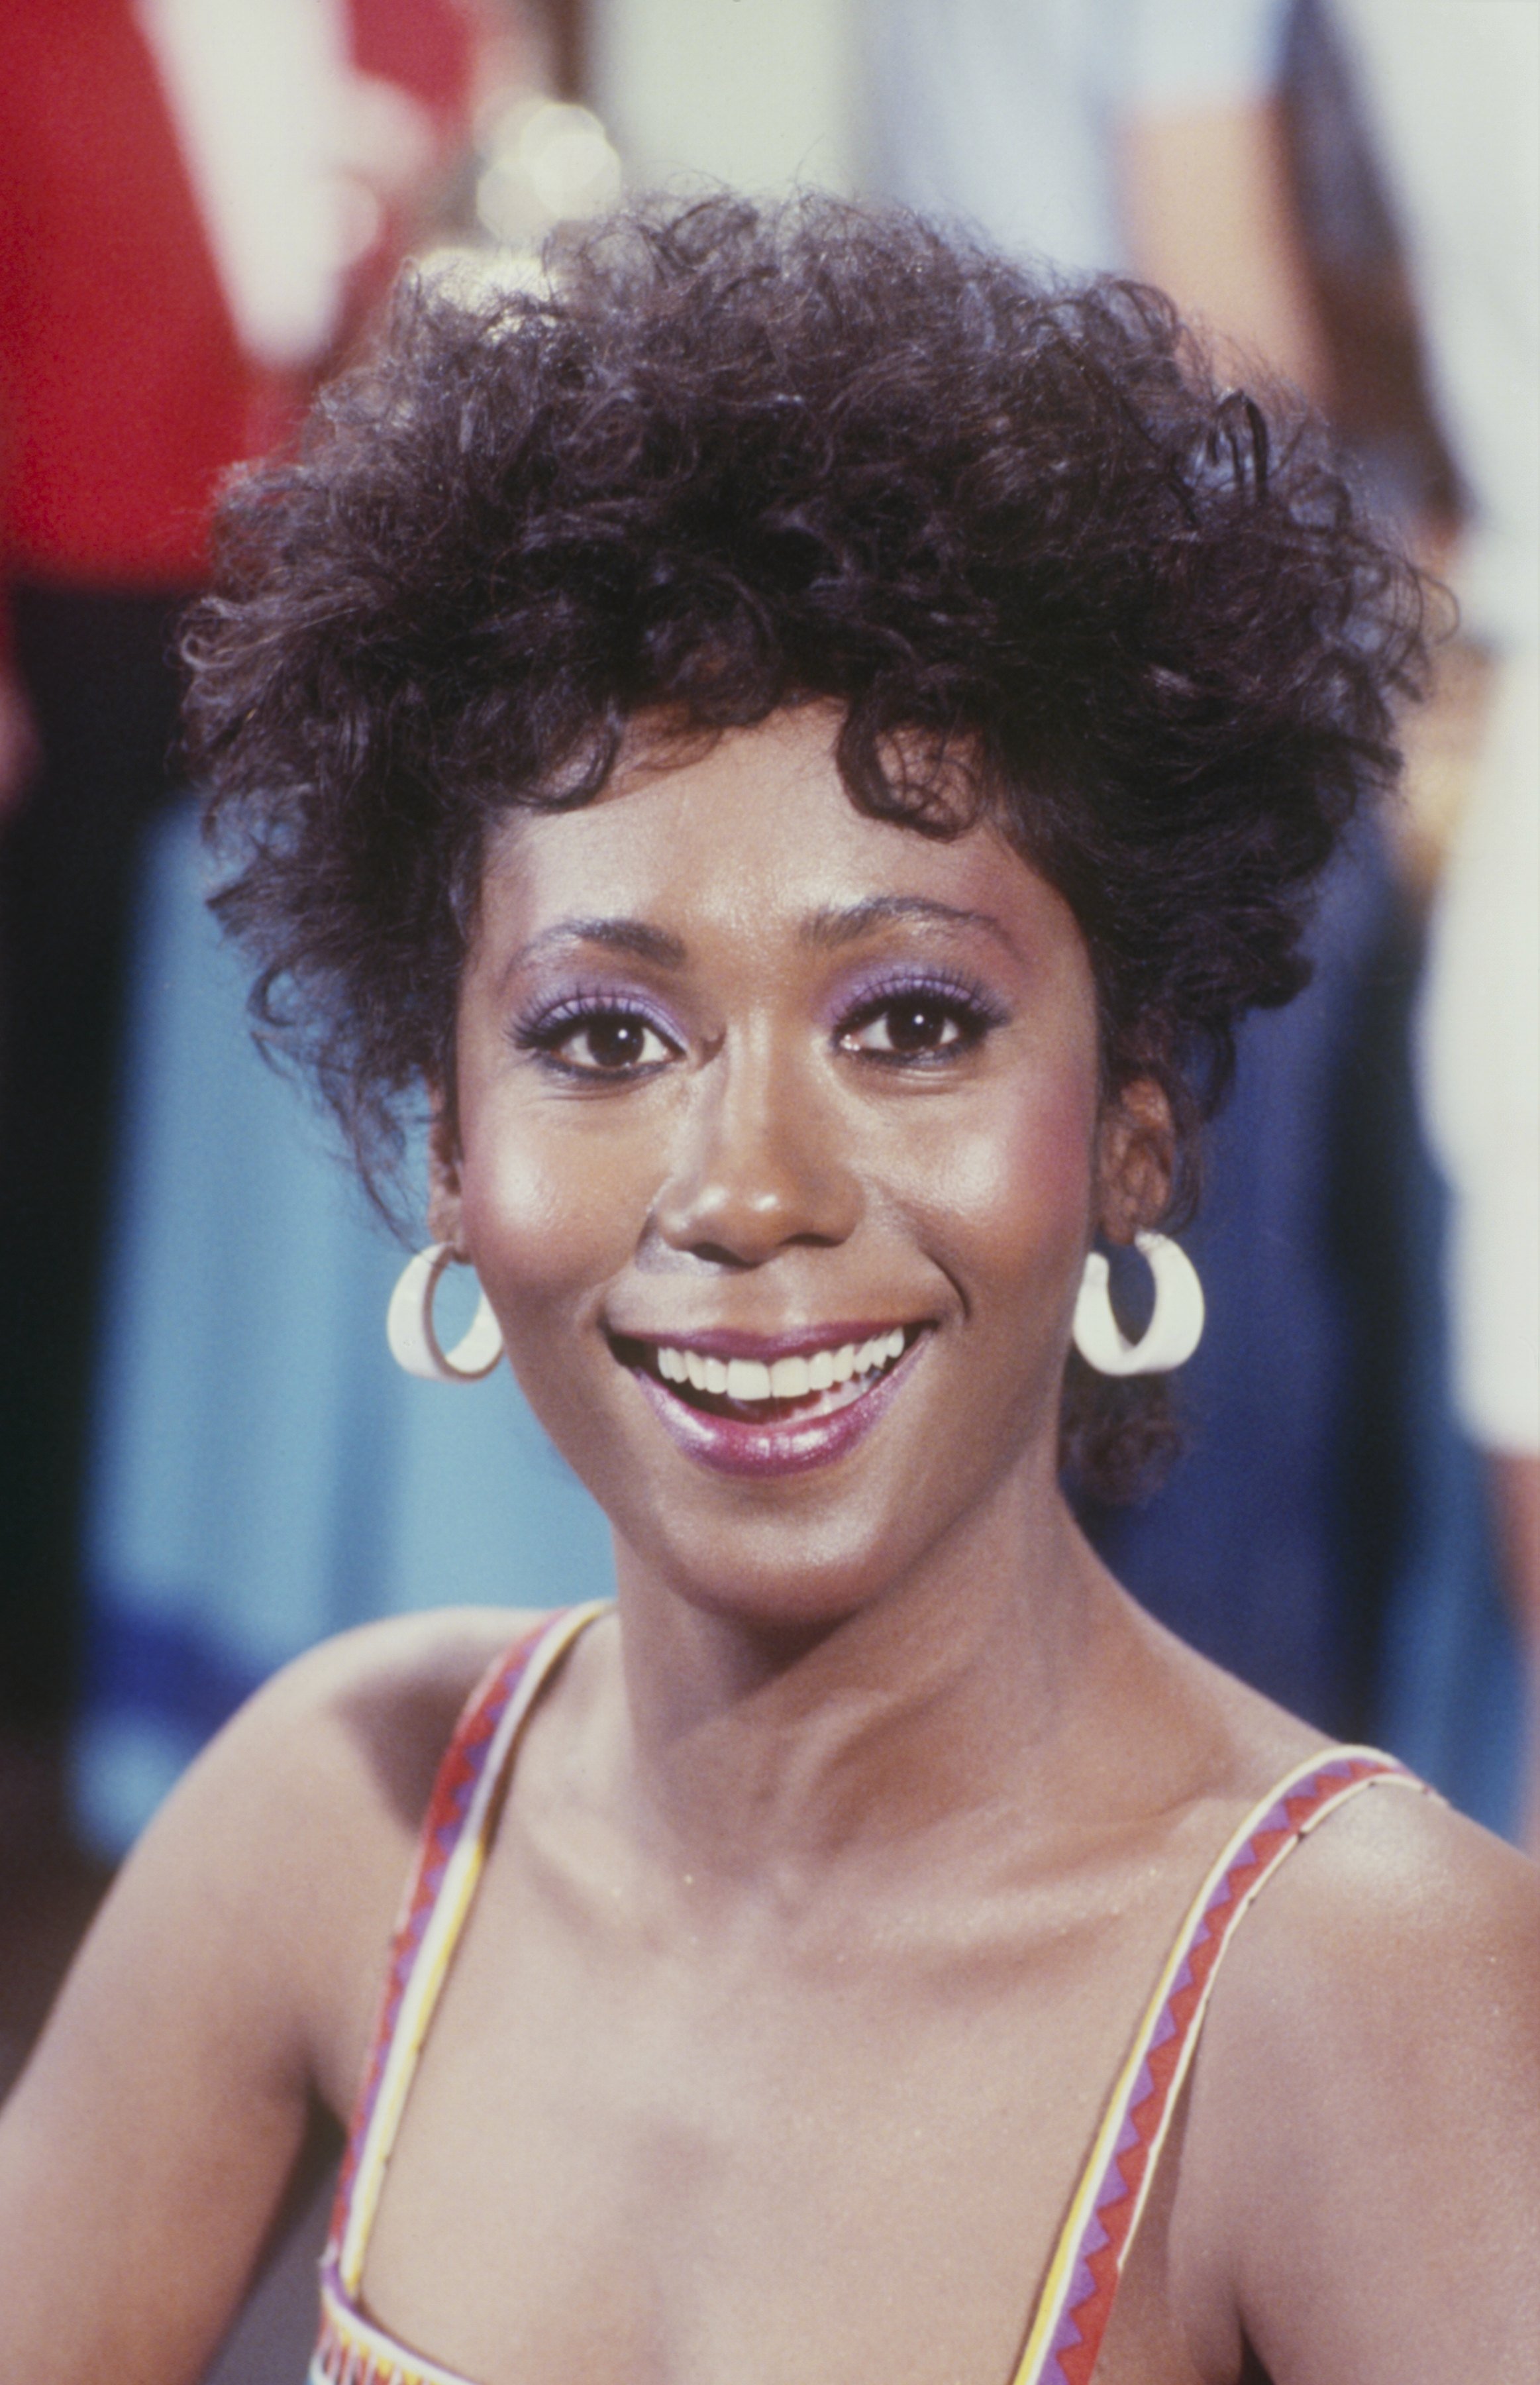 Berlinda Tolbert in an episode of "The Love Boat" which aired on January 5, 1985 | Photo: Getty Images